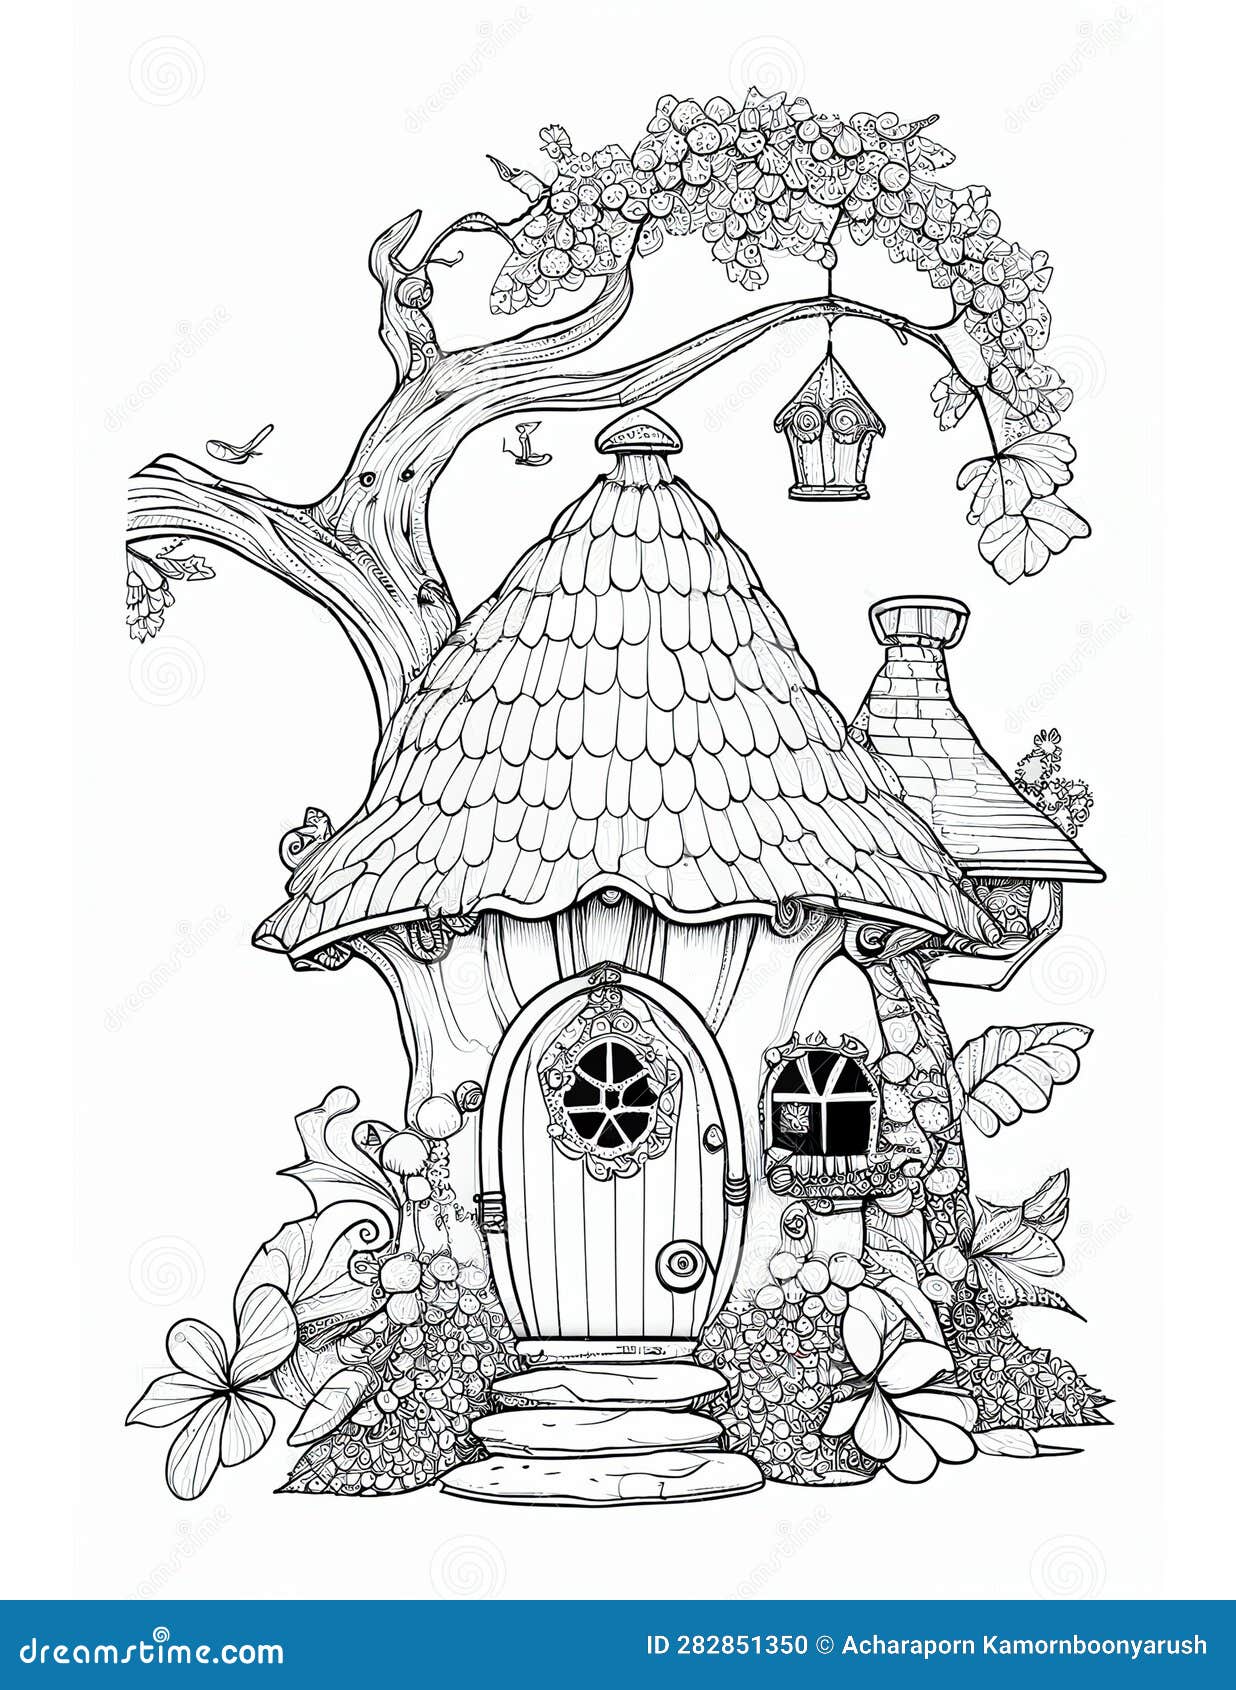 Cute fairy cottage coloring book kids adult coloring pages stock illustration